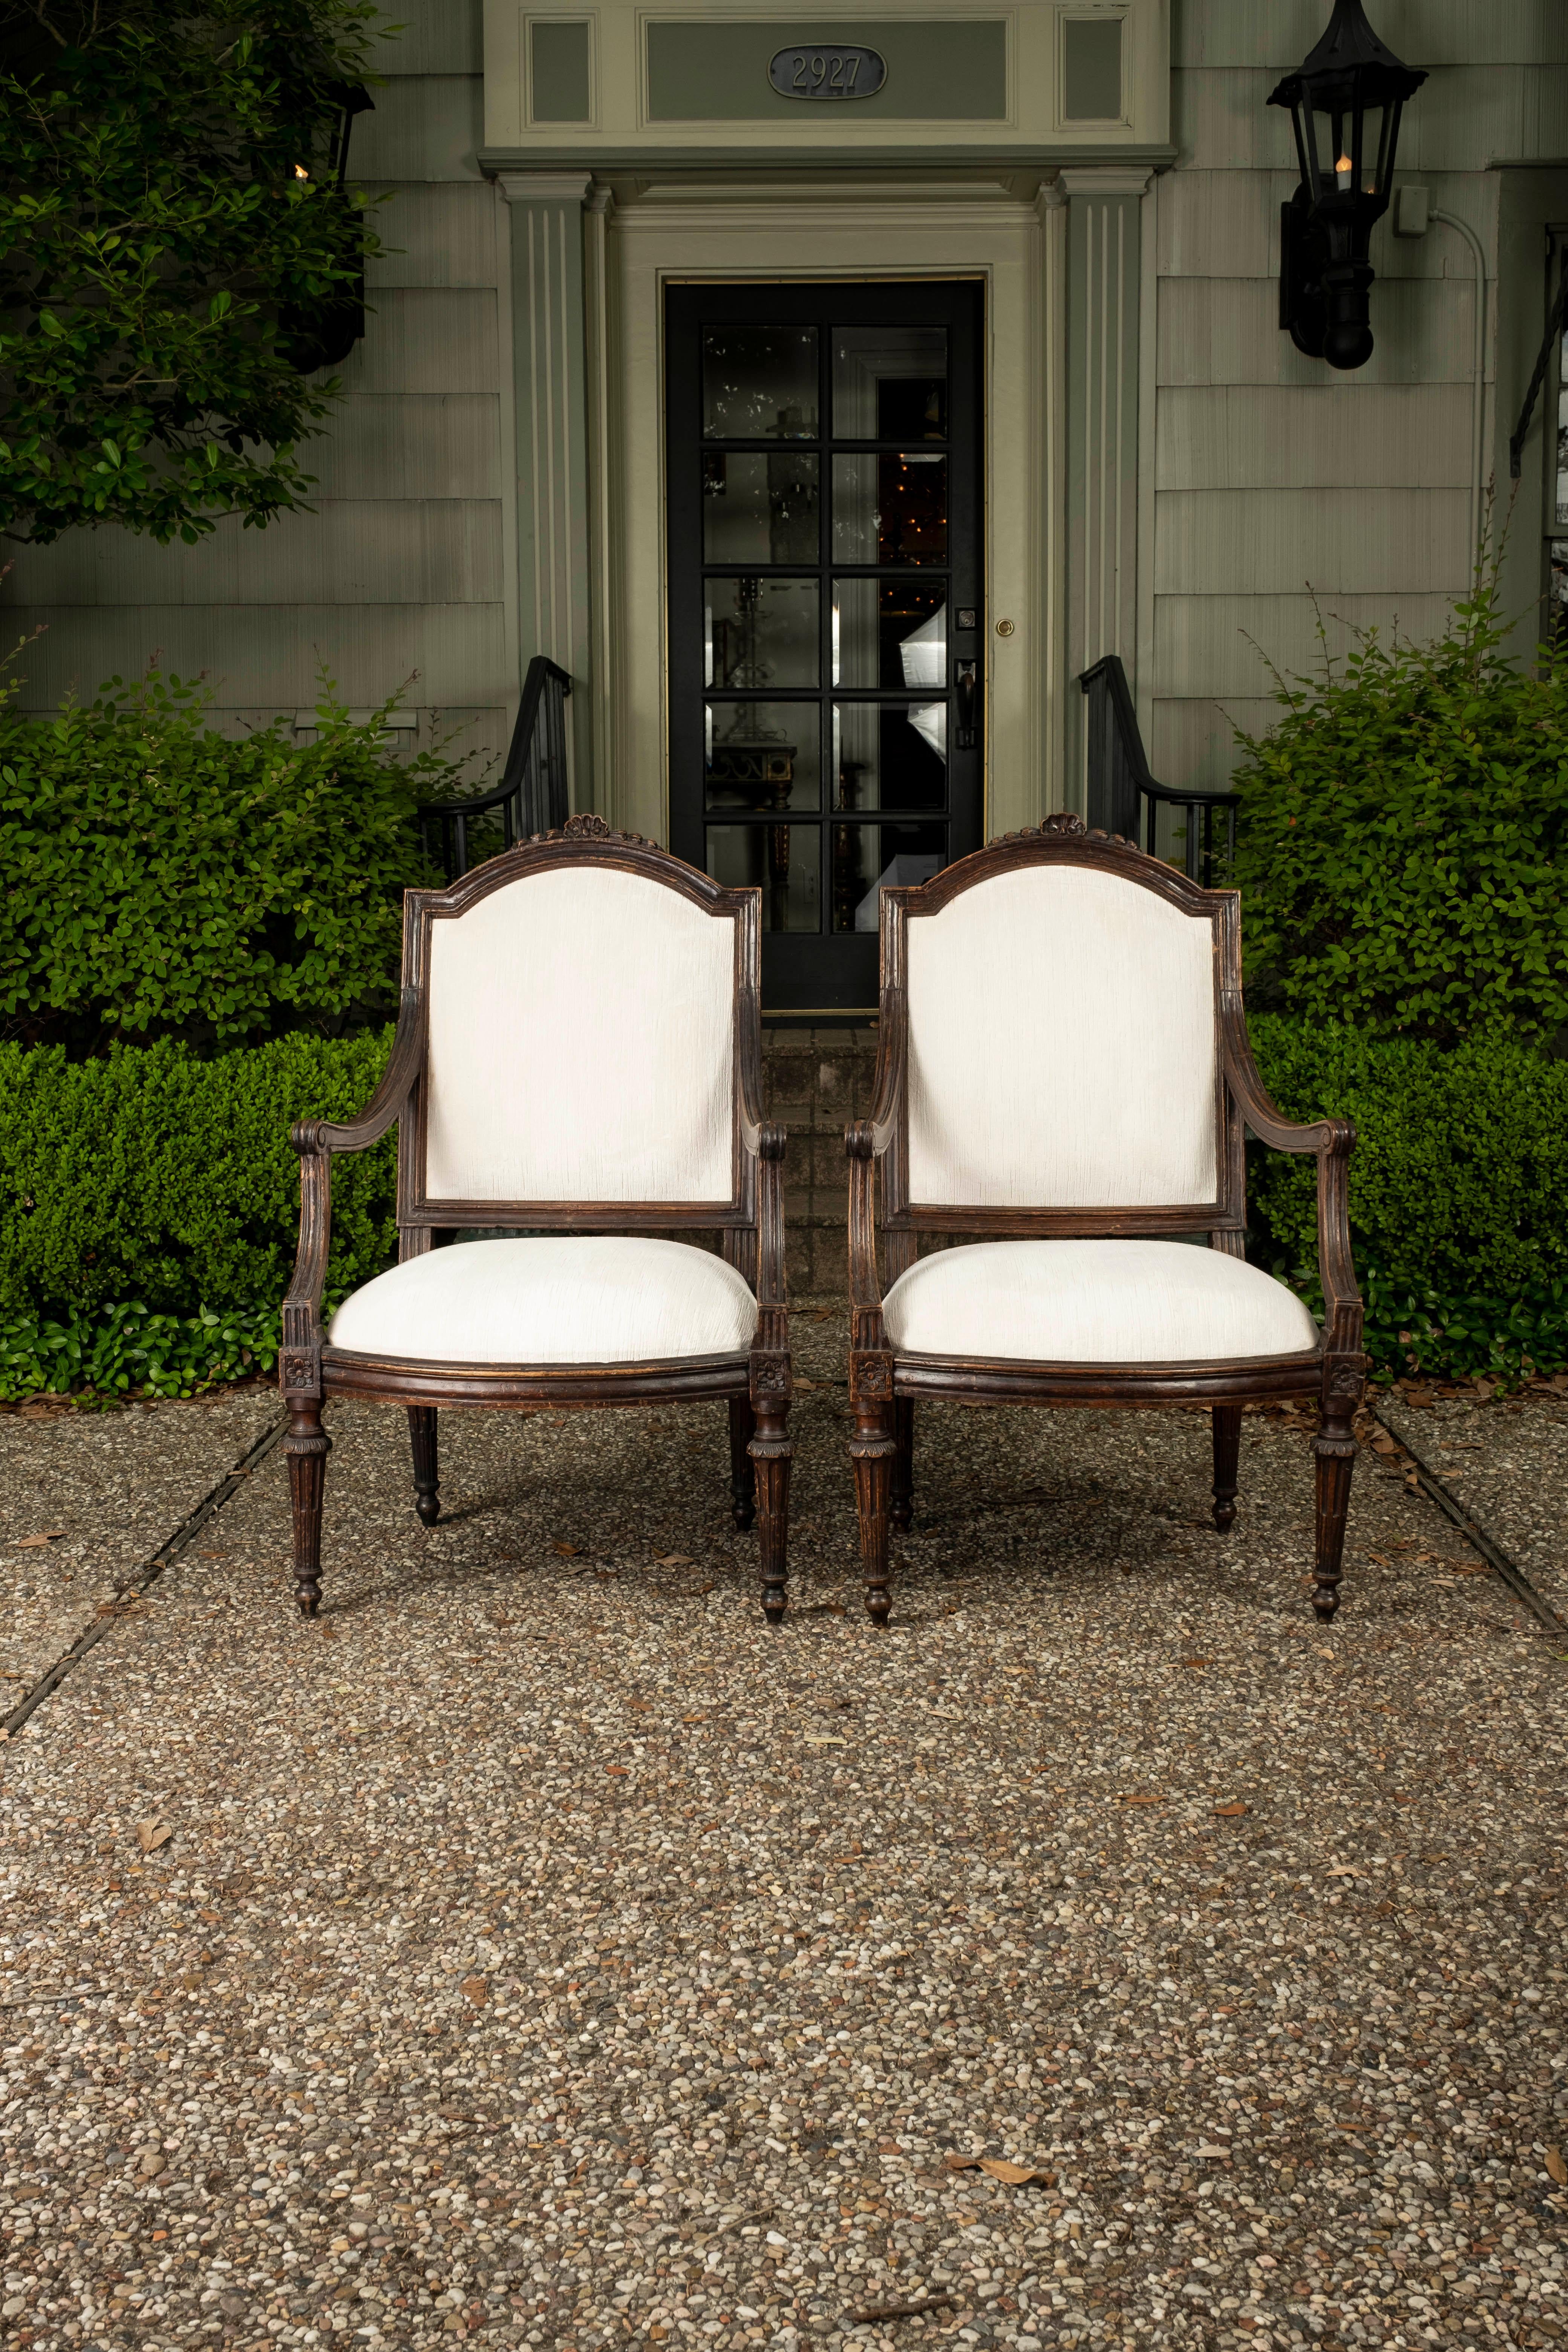 Pair of 18th century Tuscan walnut side chairs. These large stunning Italian Louis XVI armchairs or side chairs from the Tuscany region were taken down to frame and professionally upholstered in striated white cut velvet. These grand 18th century